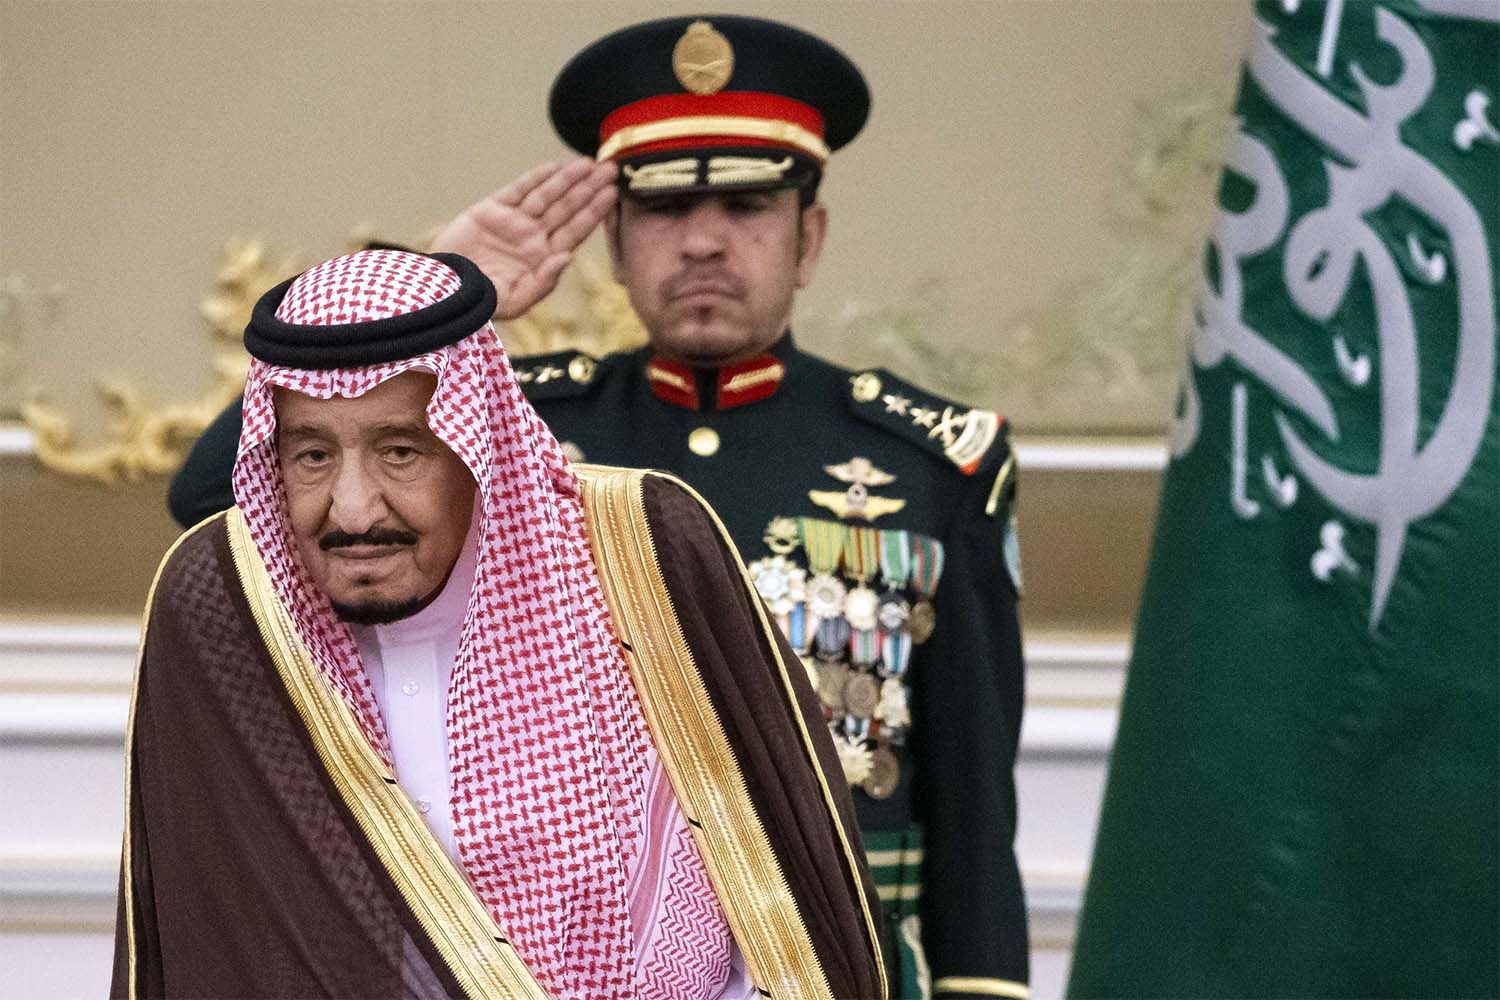 A royal decree issued by King Salman in April said the kingdom would no longer impose the death sentence on people who committed crimes while minors